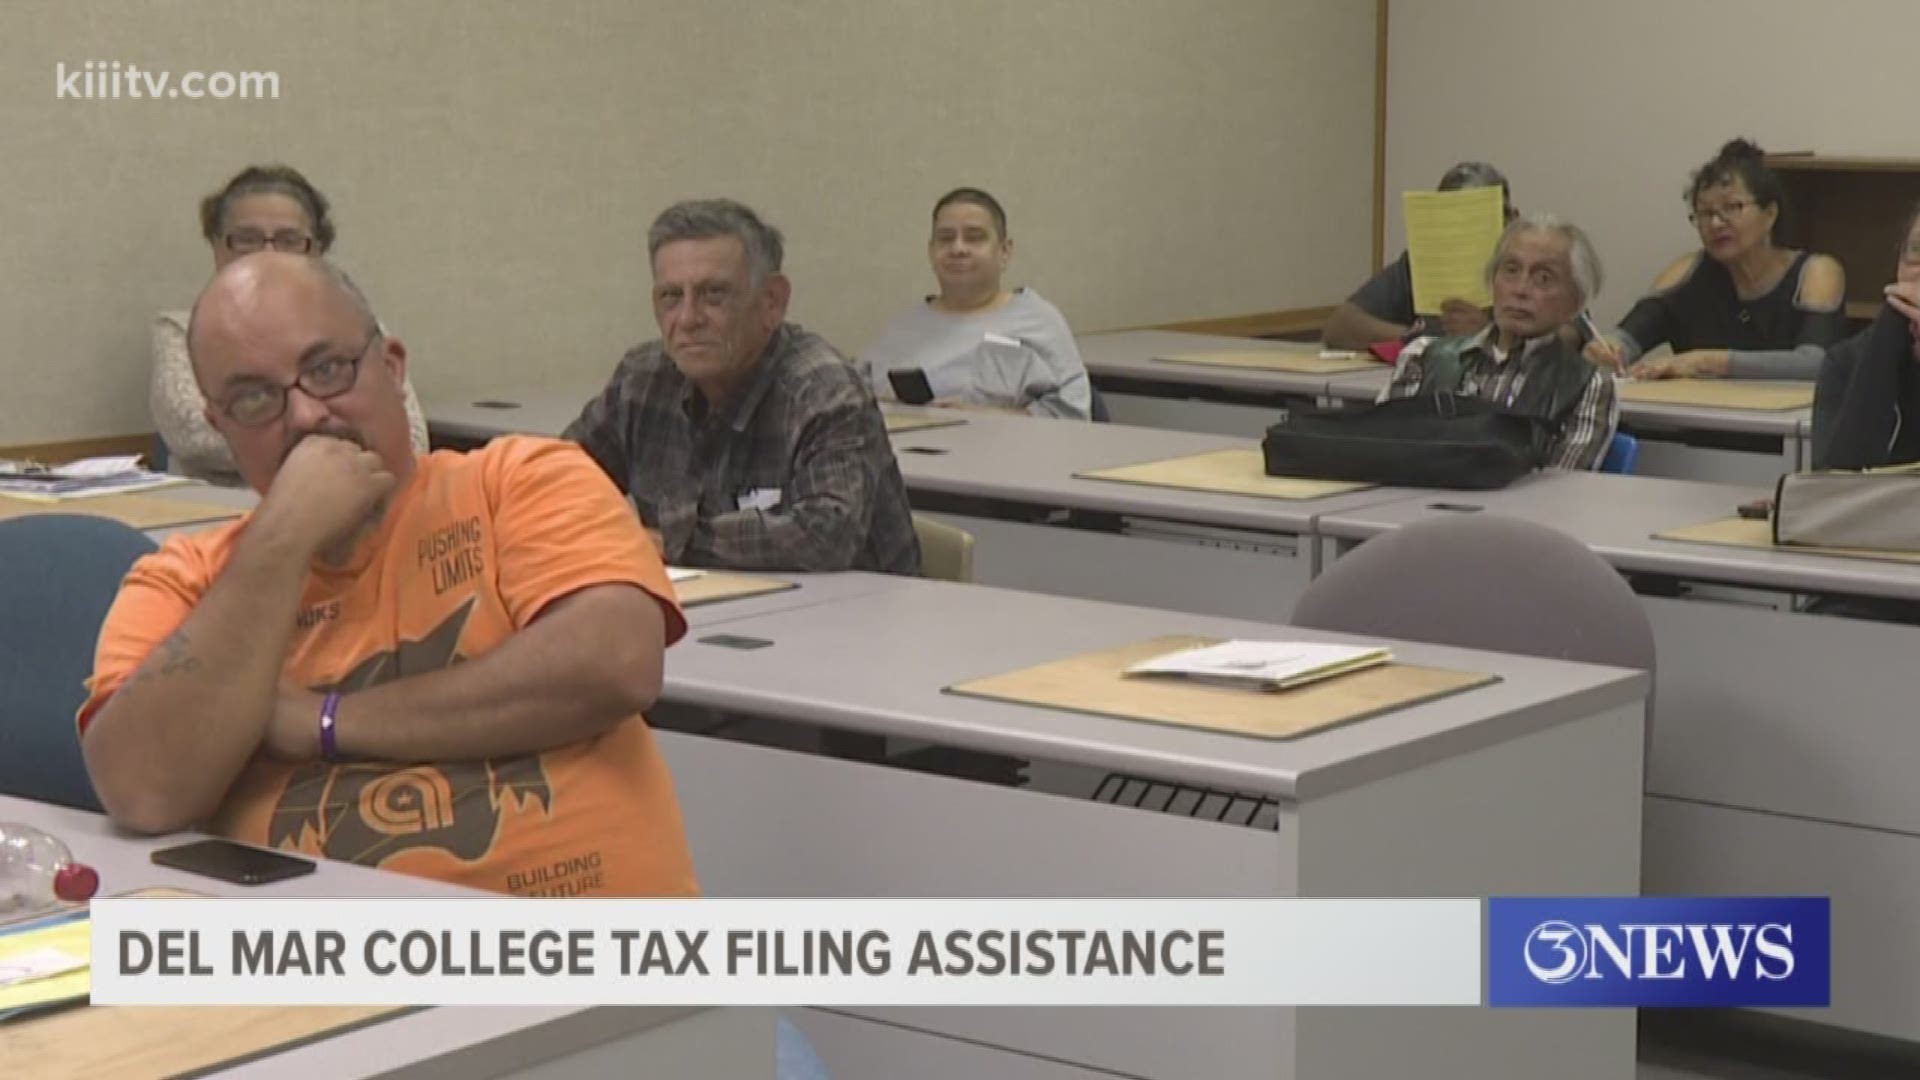 Tax season is here, and if you need some extra help filing your taxes, some well-trained college students are standing by and willing to help.